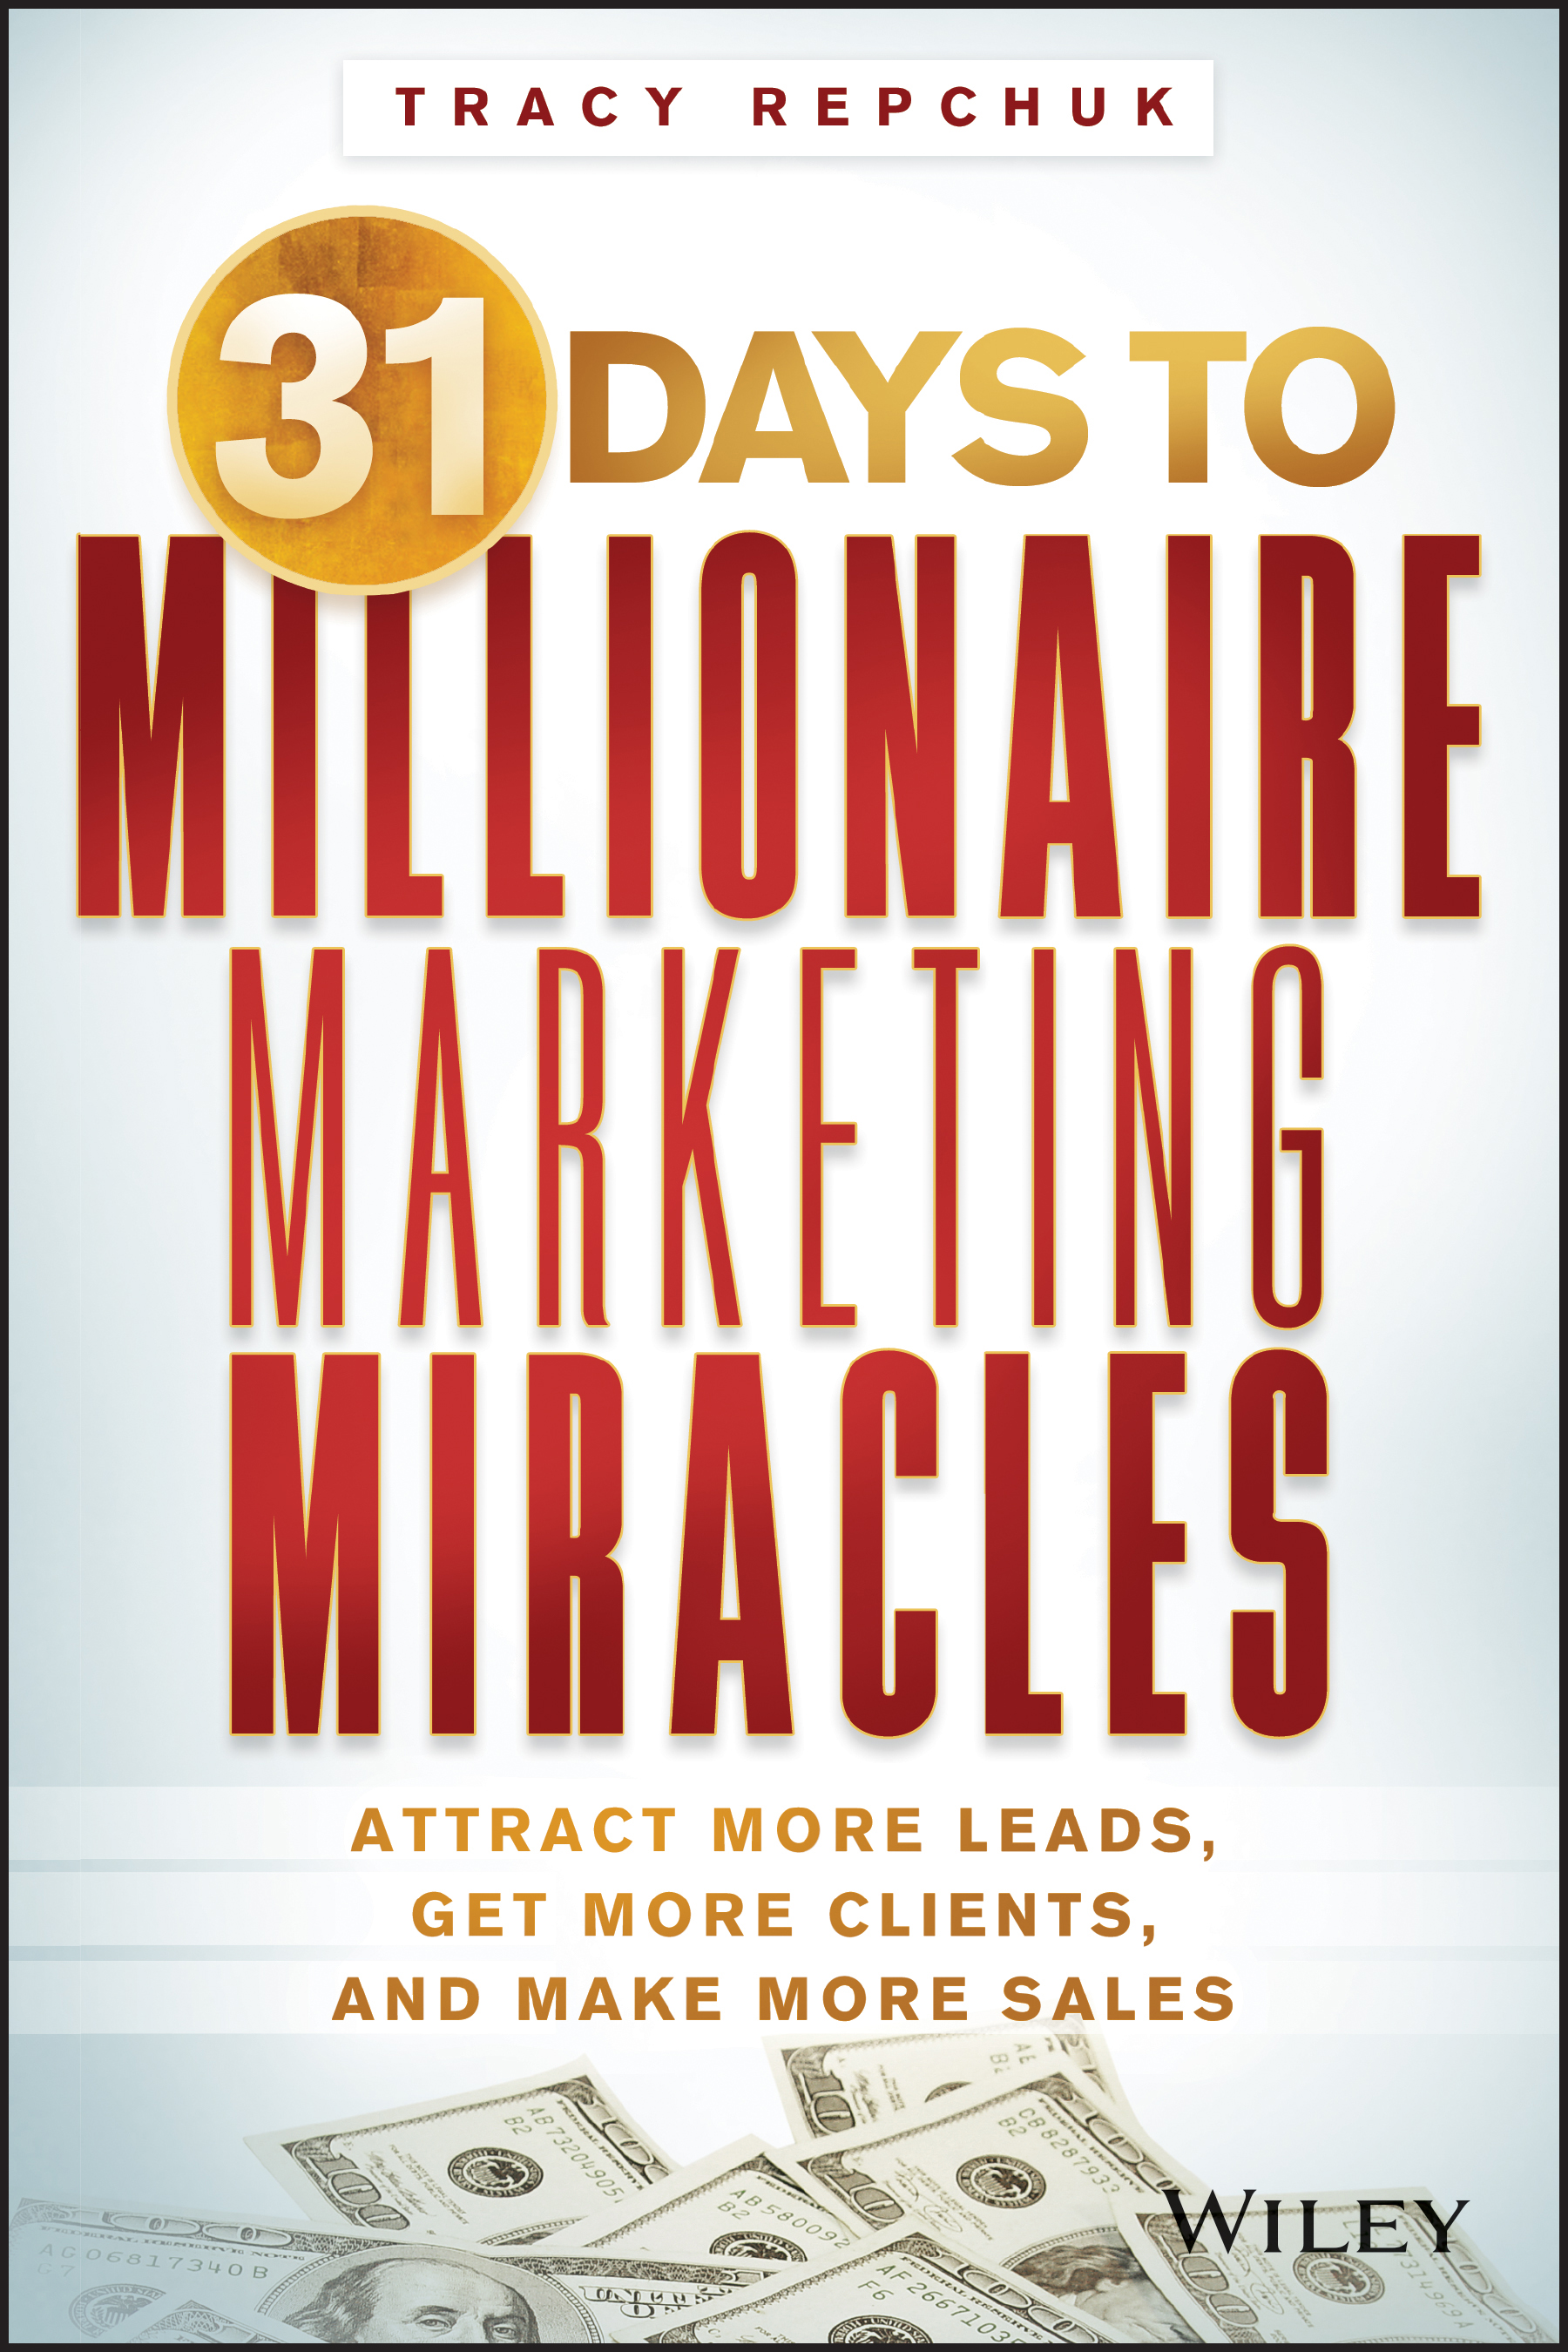 31-Days-to-Millionaire-Marketing-Miracles--Attract-More-Leads--Get-More-Clients--and-Make-More-Sales